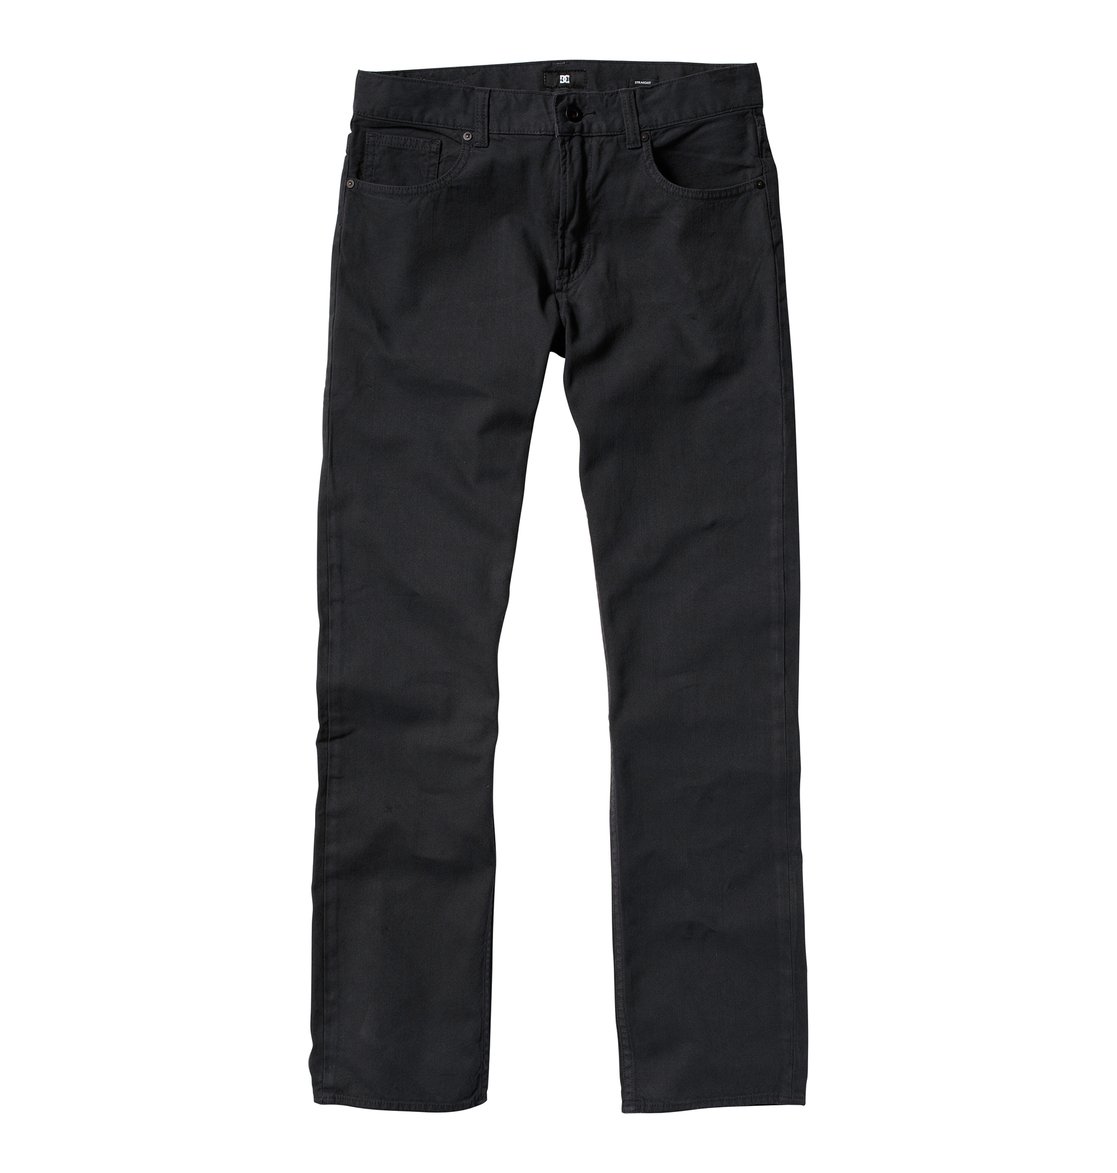 Men's Straight Canvas Jeans ADYNP00012 | DC Shoes